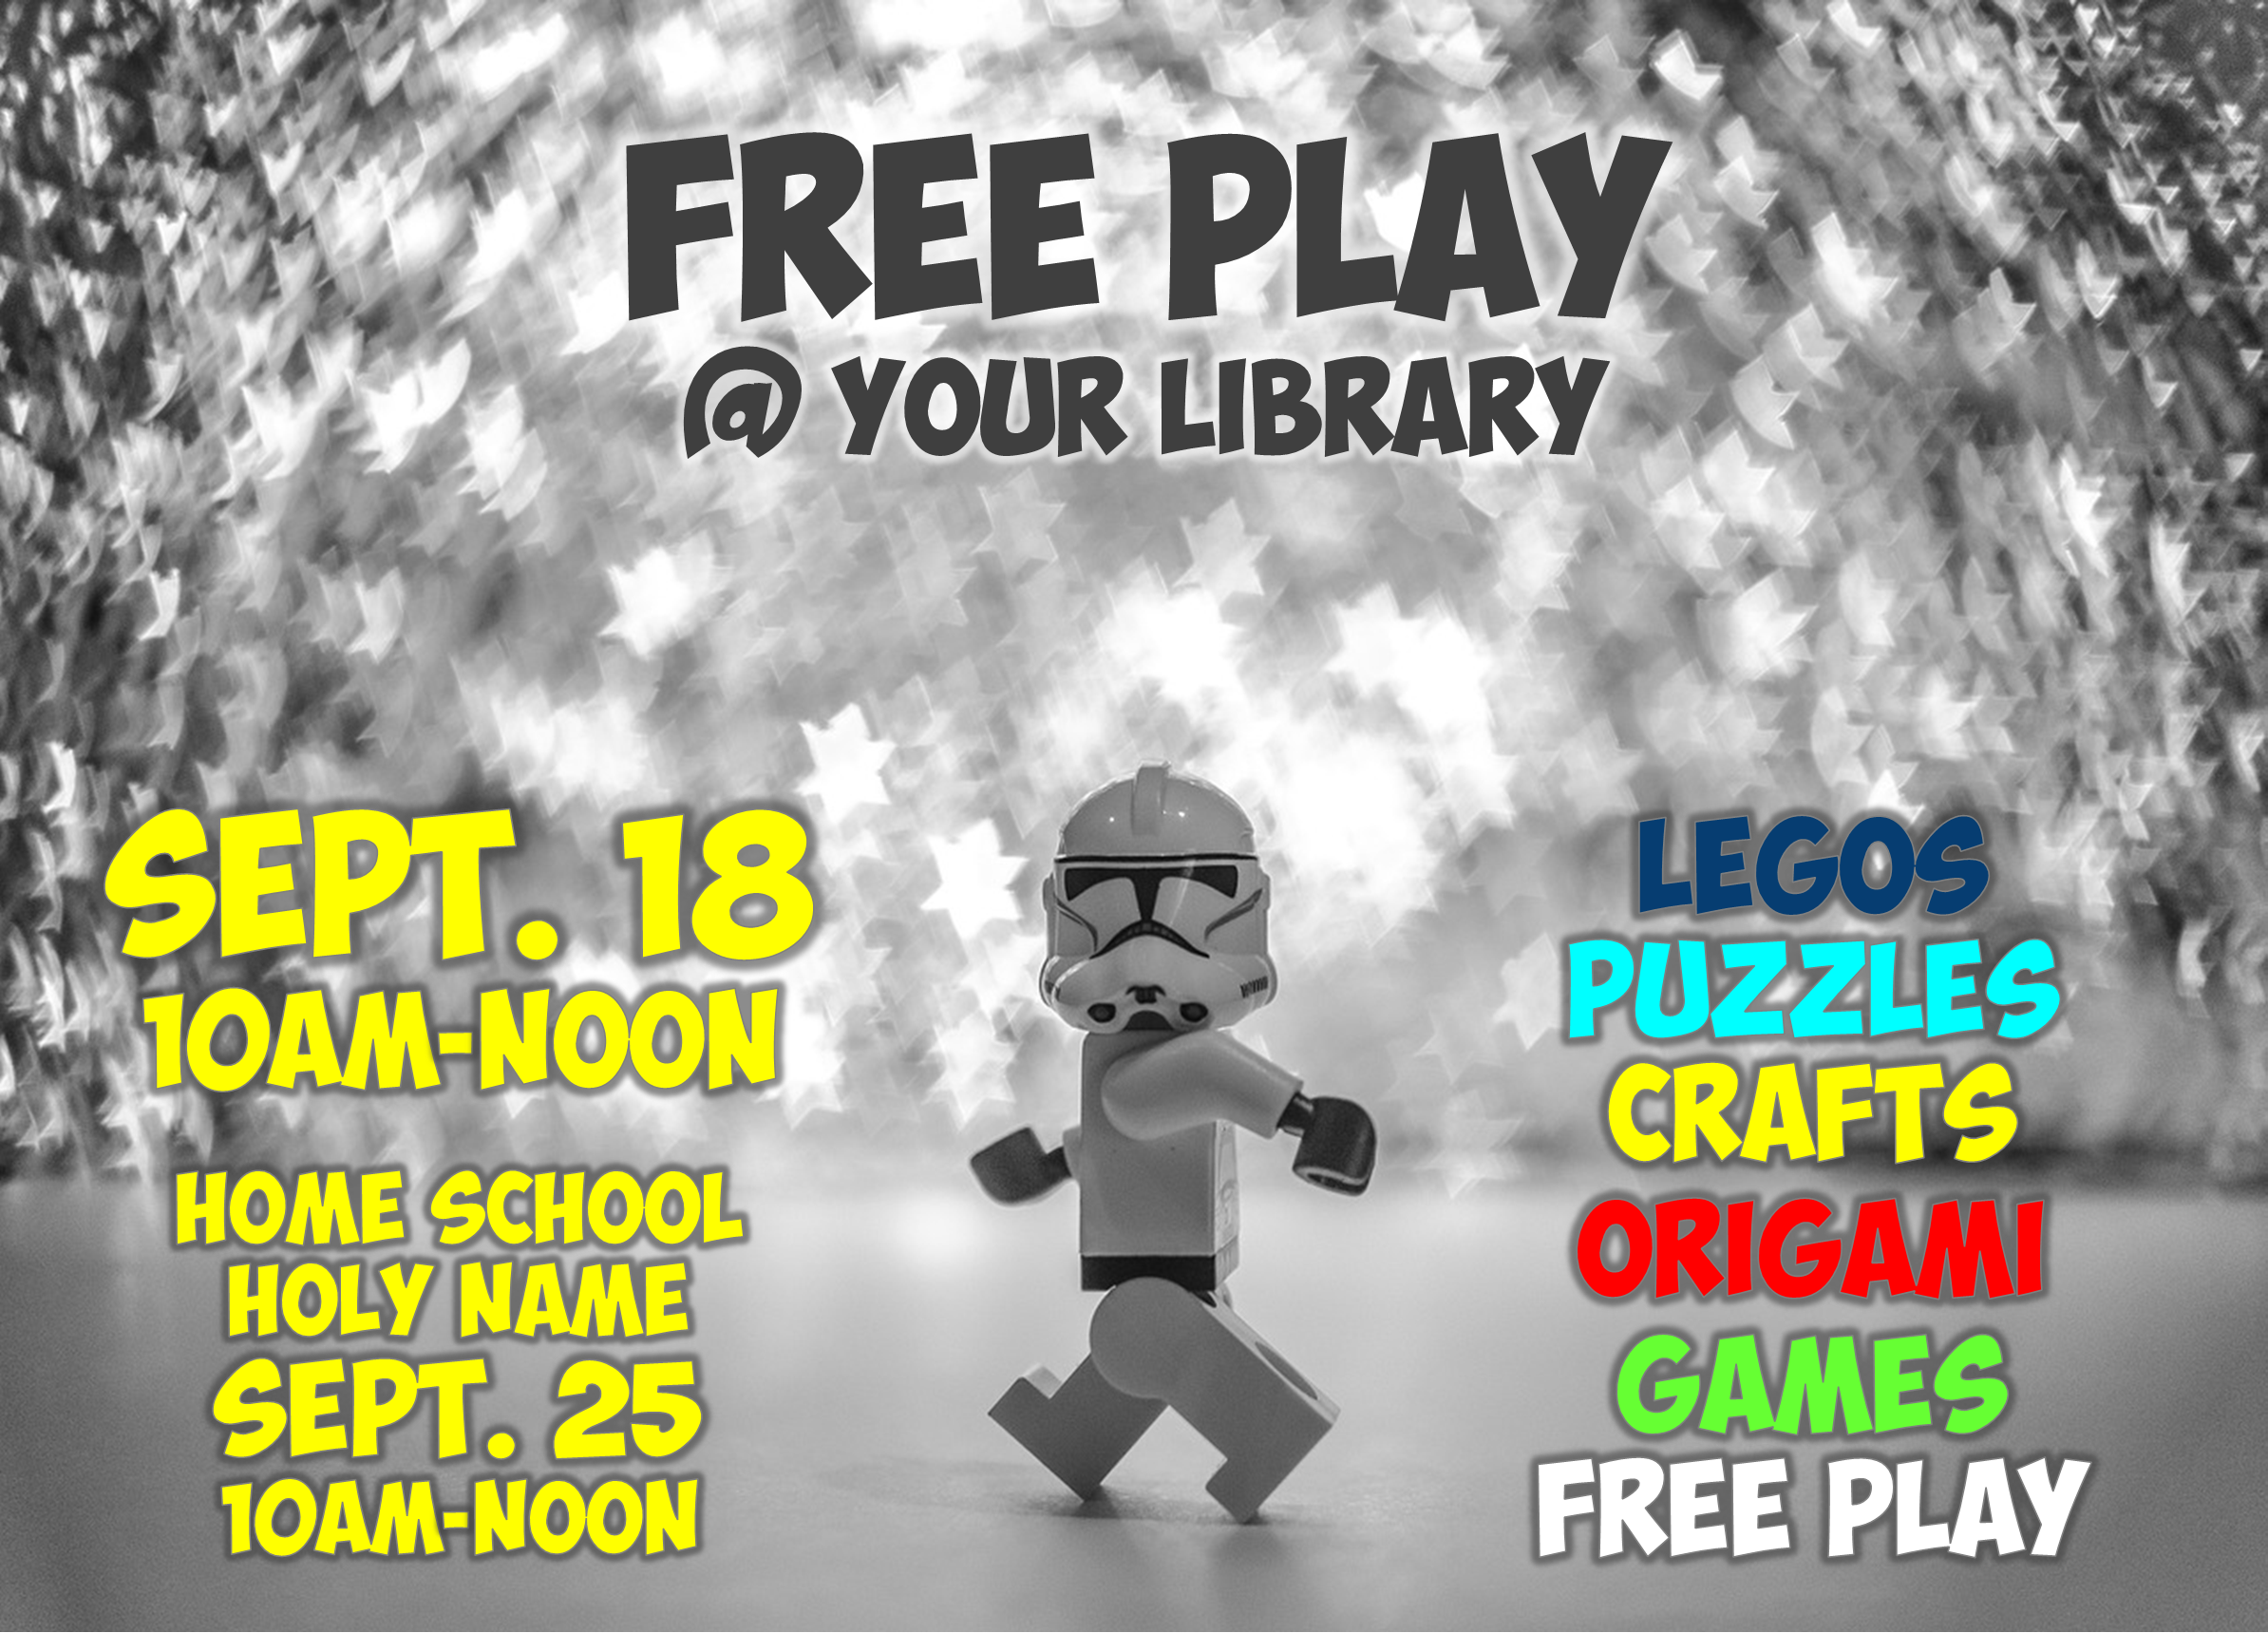 image of LEGO stormtroper walking - (to the library we hope!) 